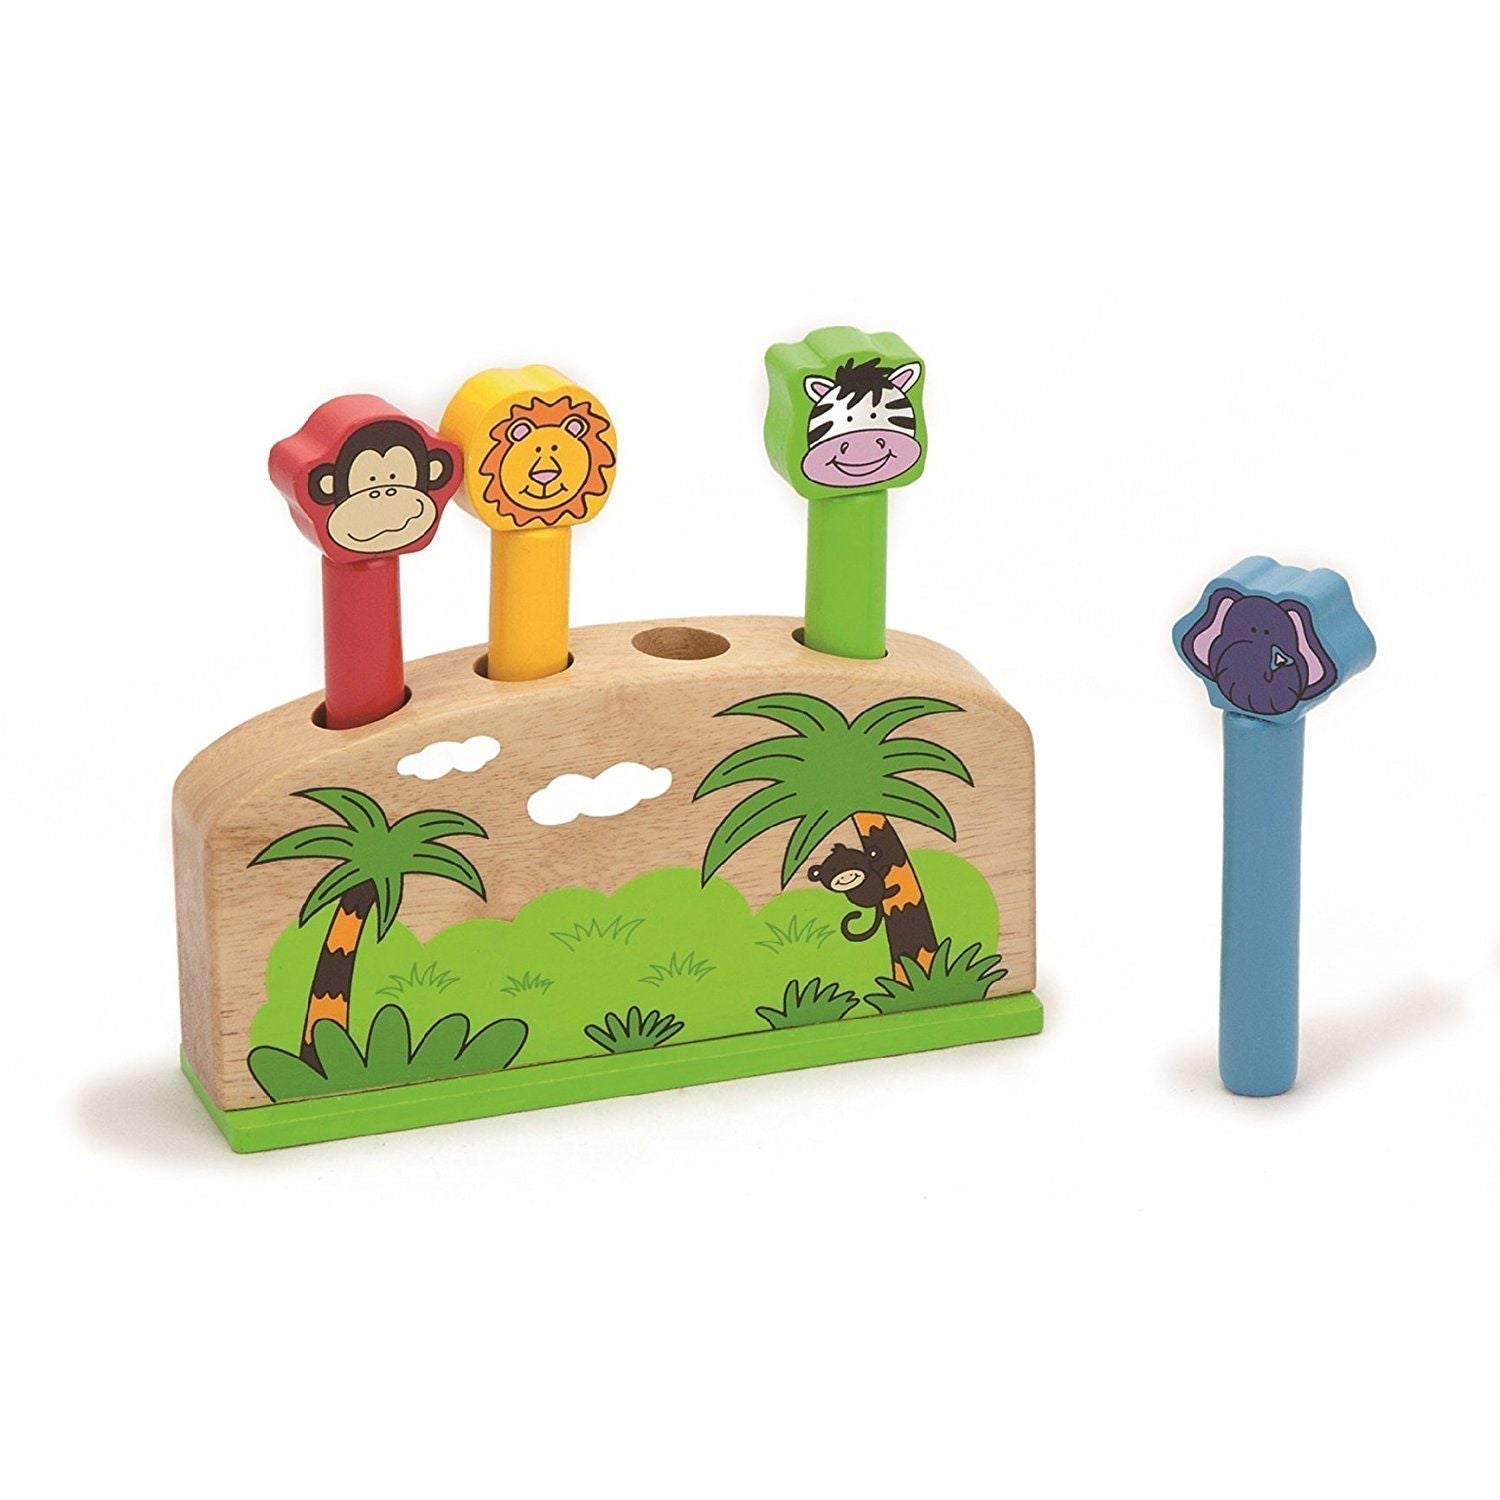 Pop Up Animals, Crafted meticulously with premium quality wood, the Viga Toys Pop-Up Animal Toy promises not just moments of fun but a journey of discovery and learning for young minds. This sturdy and durable toy is designed to withstand the test of time, offering endless enjoyment and learning experiences for children. Features: Bright and Attractive Design: The vivid screen print and adorable animal designs will instantly catch the eyes of little explorers, inviting them into a world of vibrant colours a